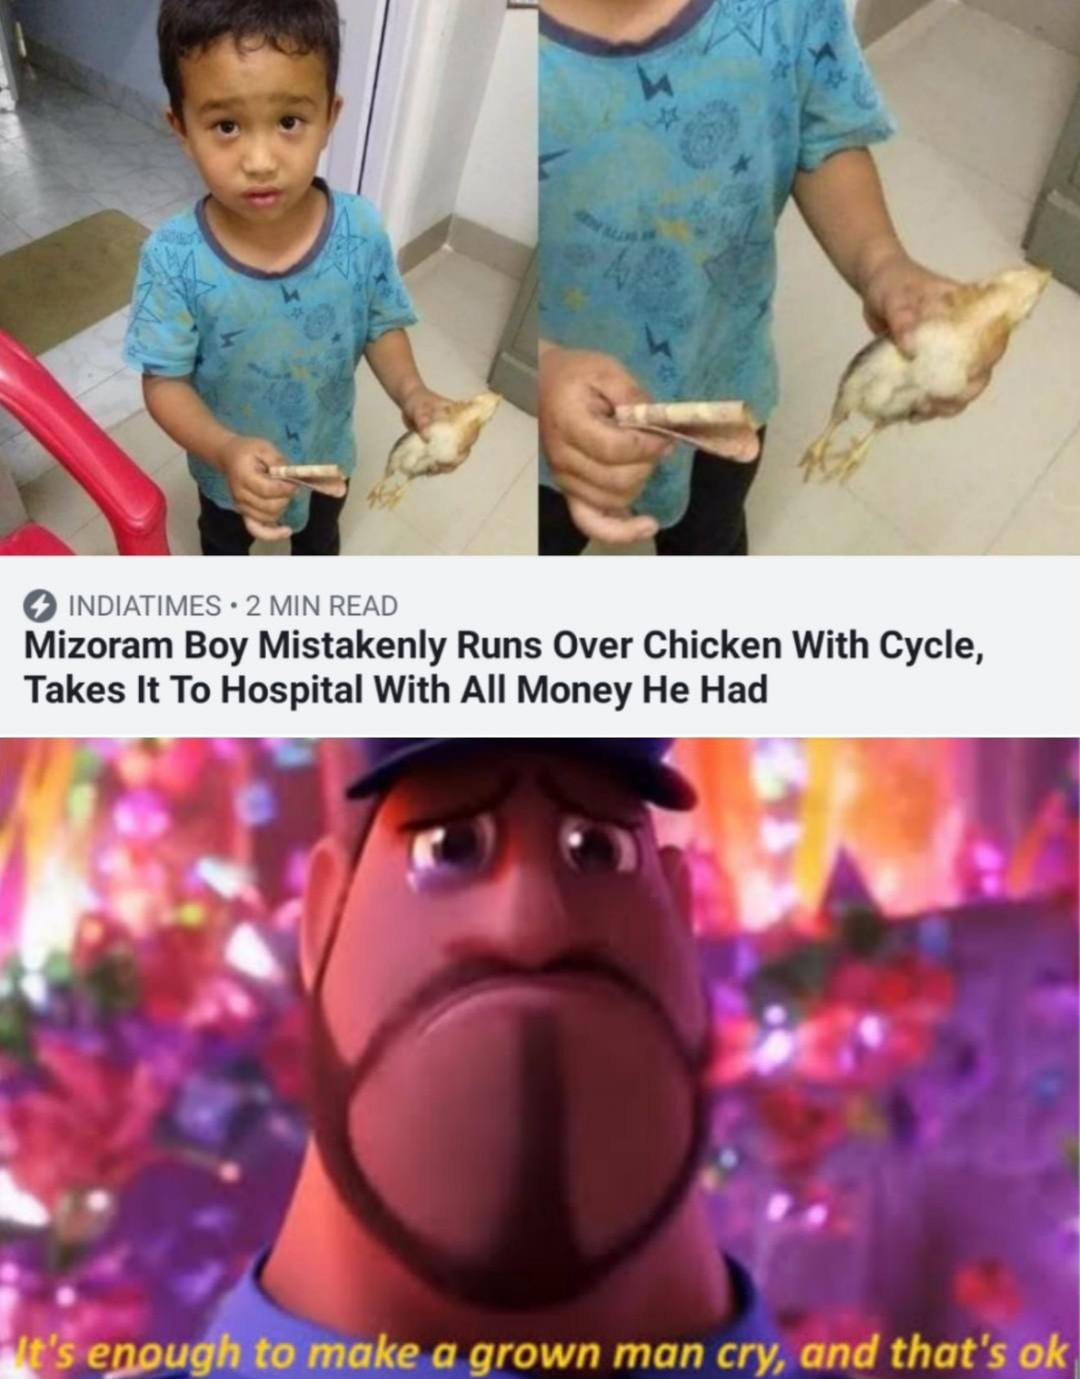 enough to make a grown man cry meme - Indiatimes. 2 Min Read Mizoram Boy Mistakenly Runs Over Chicken With Cycle, Takes It To Hospital With All Money He Had re's enough to make a grown man cry, and that's ok